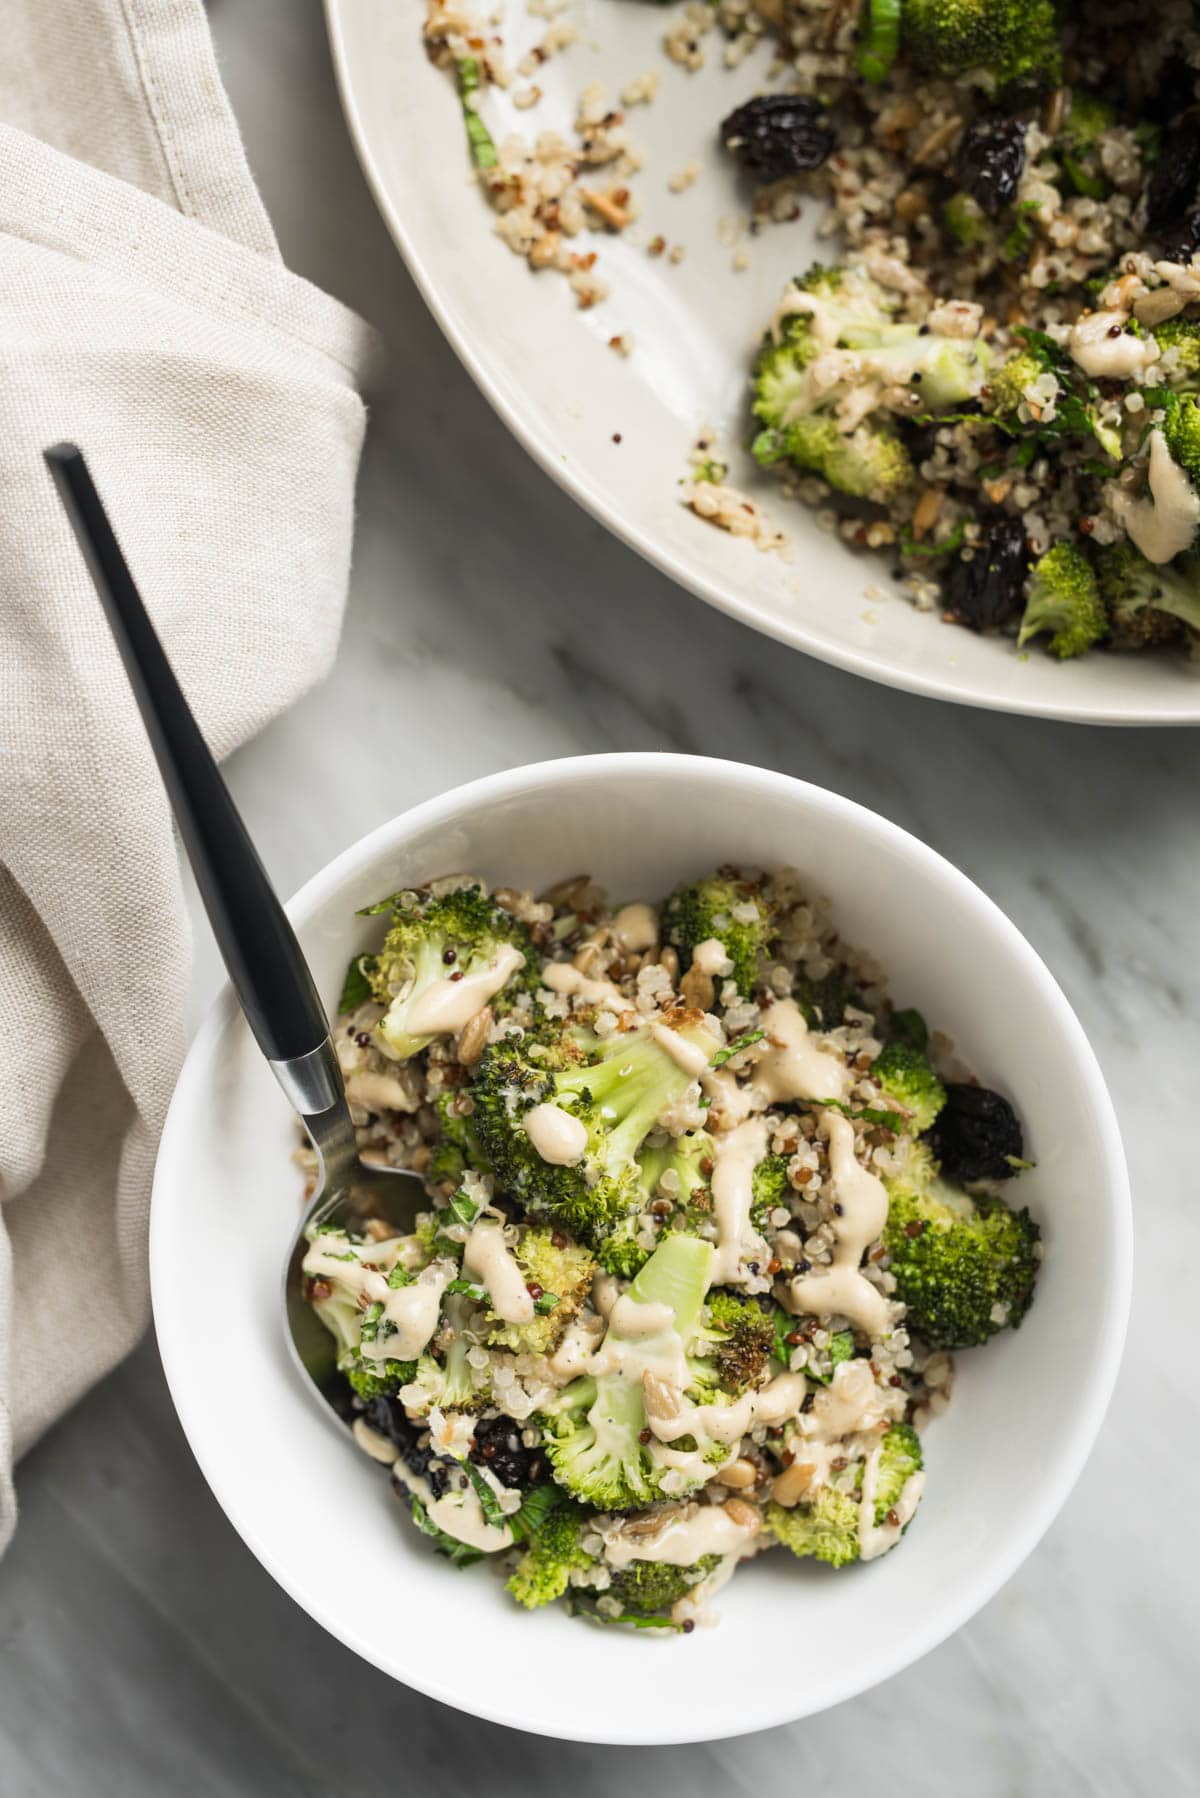 A spoon tucked into a small white bowl of broccoli quinoa salad on a marble table; a larger serving bowl and cream linen napkin surround the bowl.